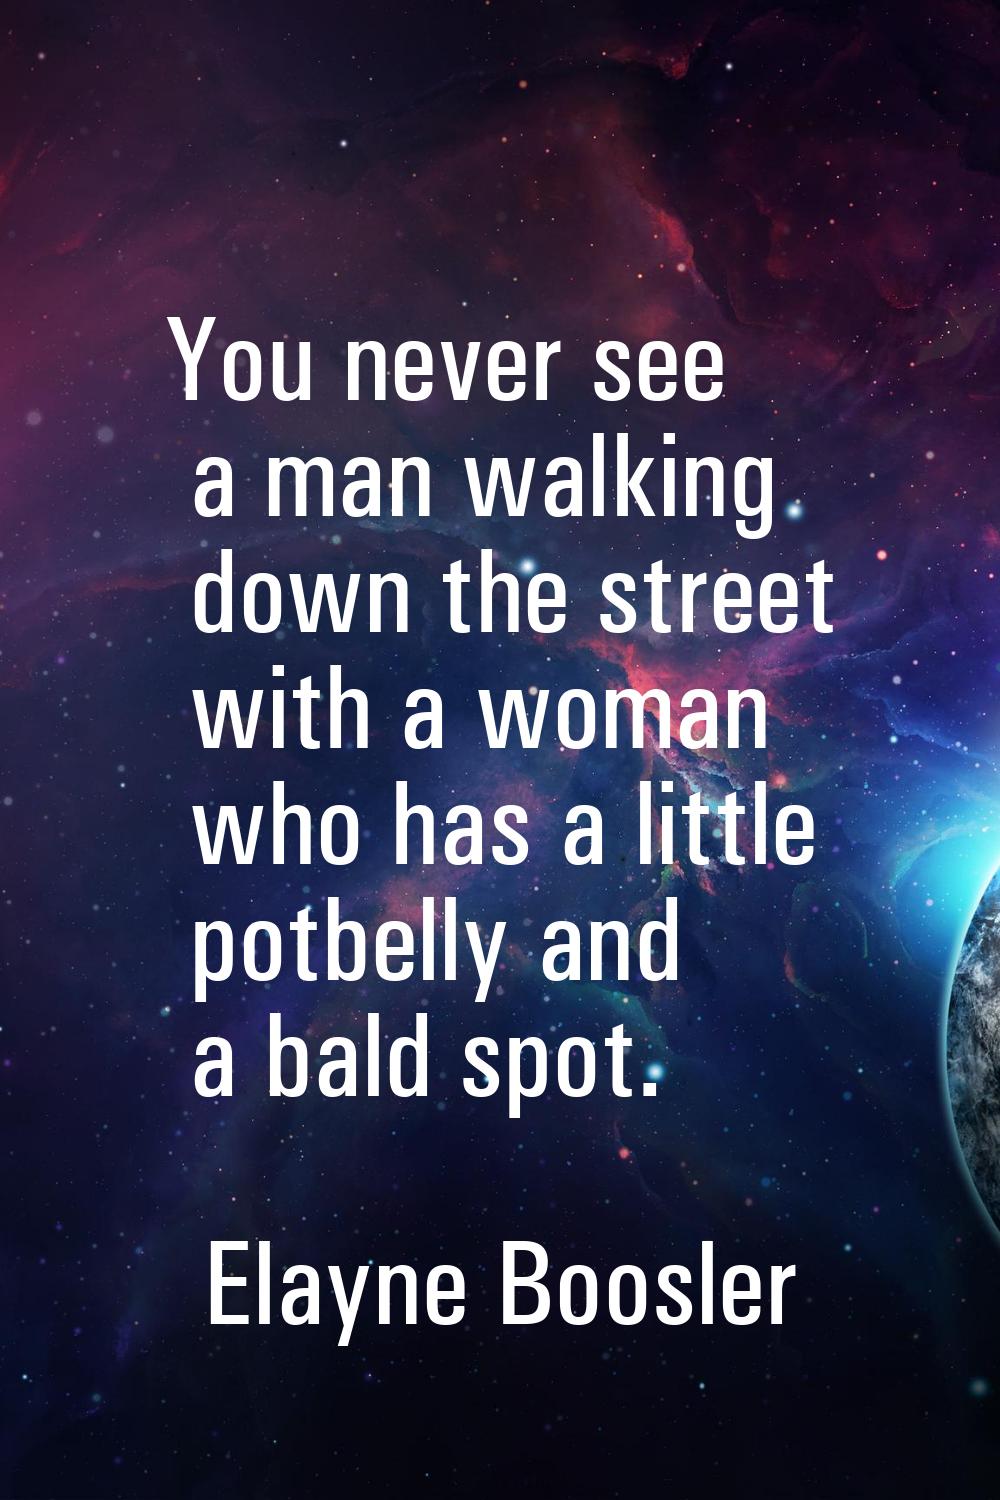 You never see a man walking down the street with a woman who has a little potbelly and a bald spot.